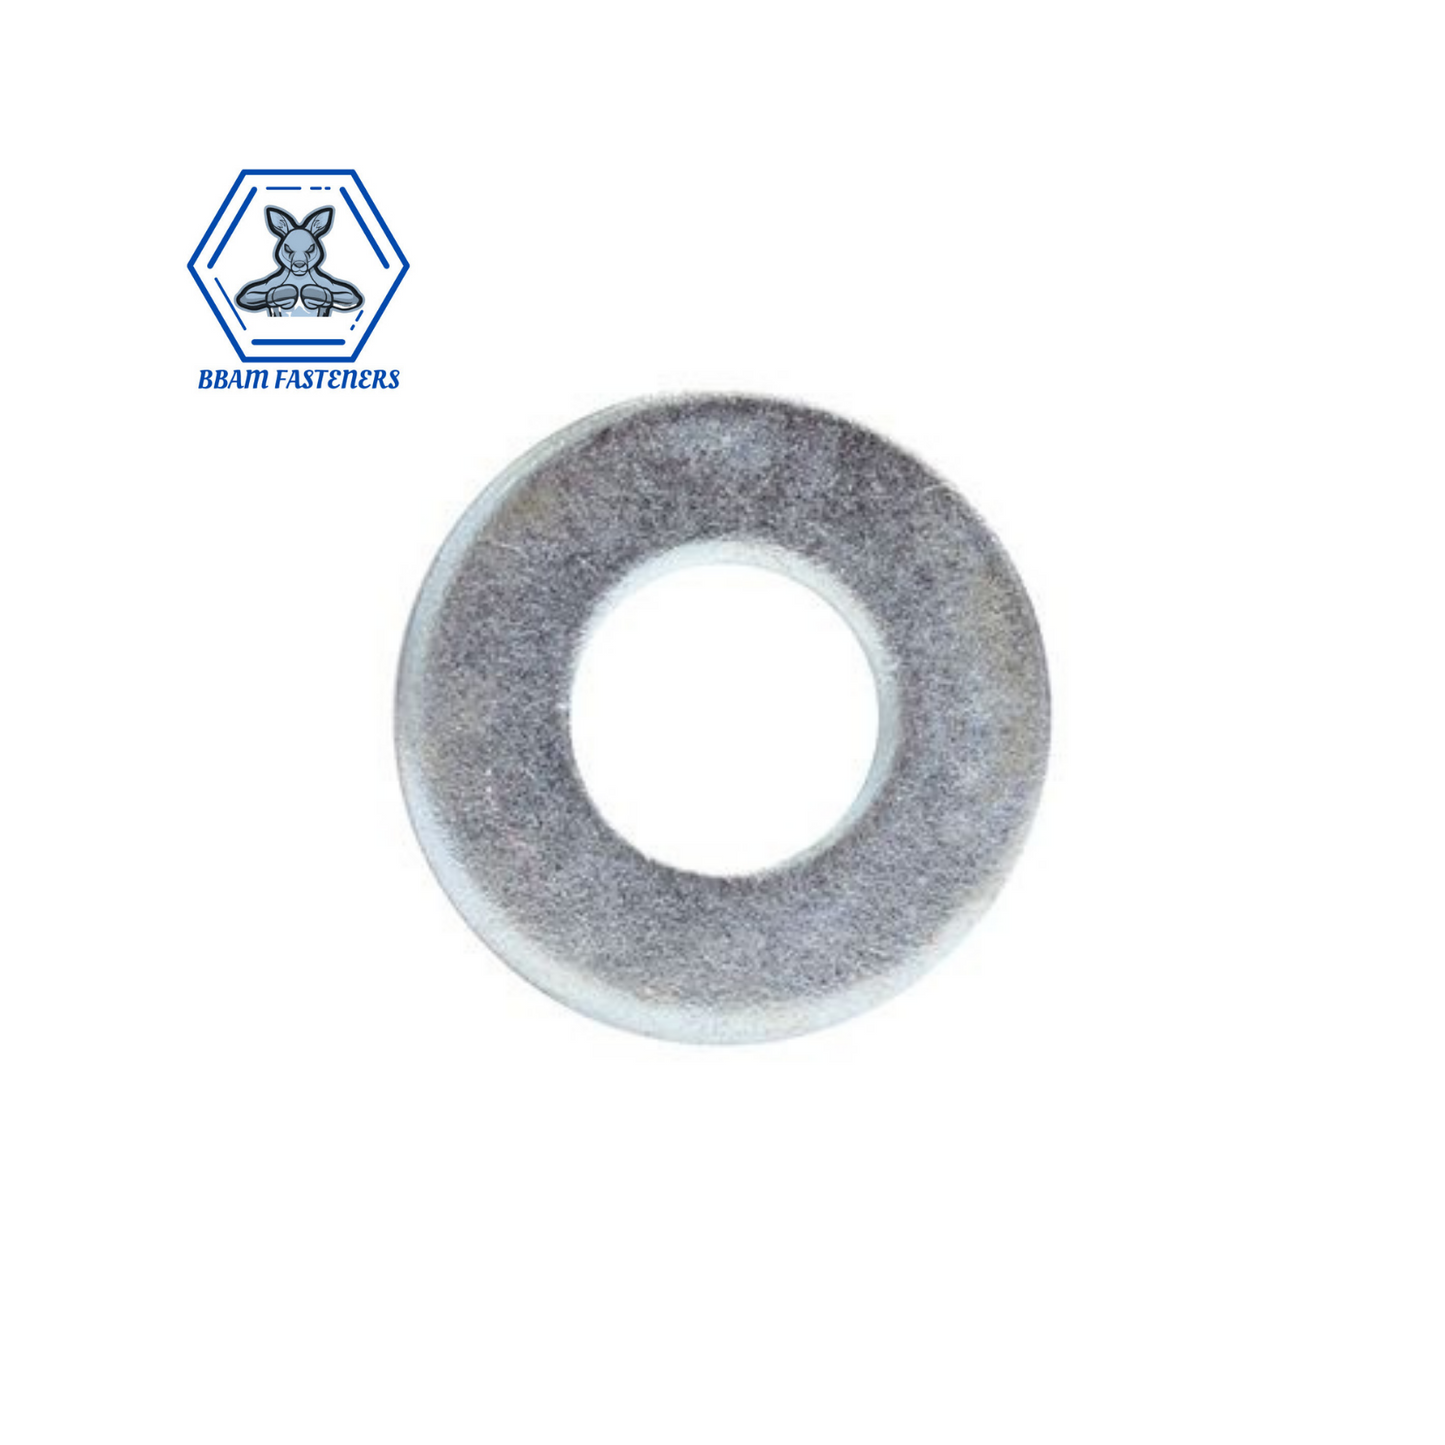 M8 Zinc Plated Flat Washer (Builders Washers)